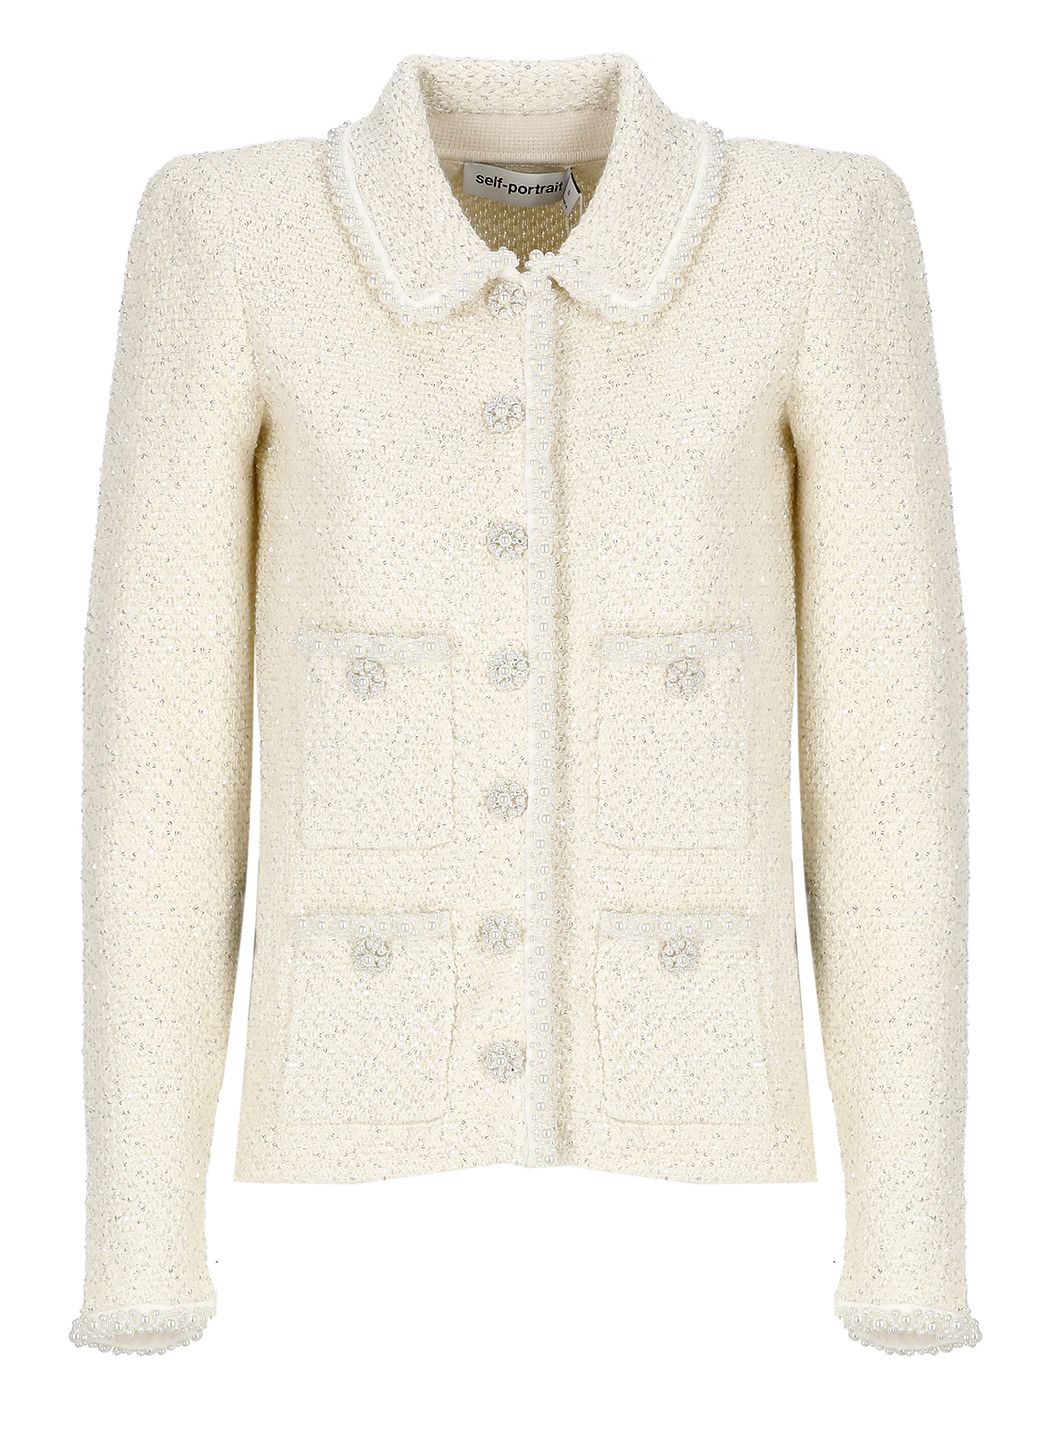 Sequin Knit Pearl cardigan